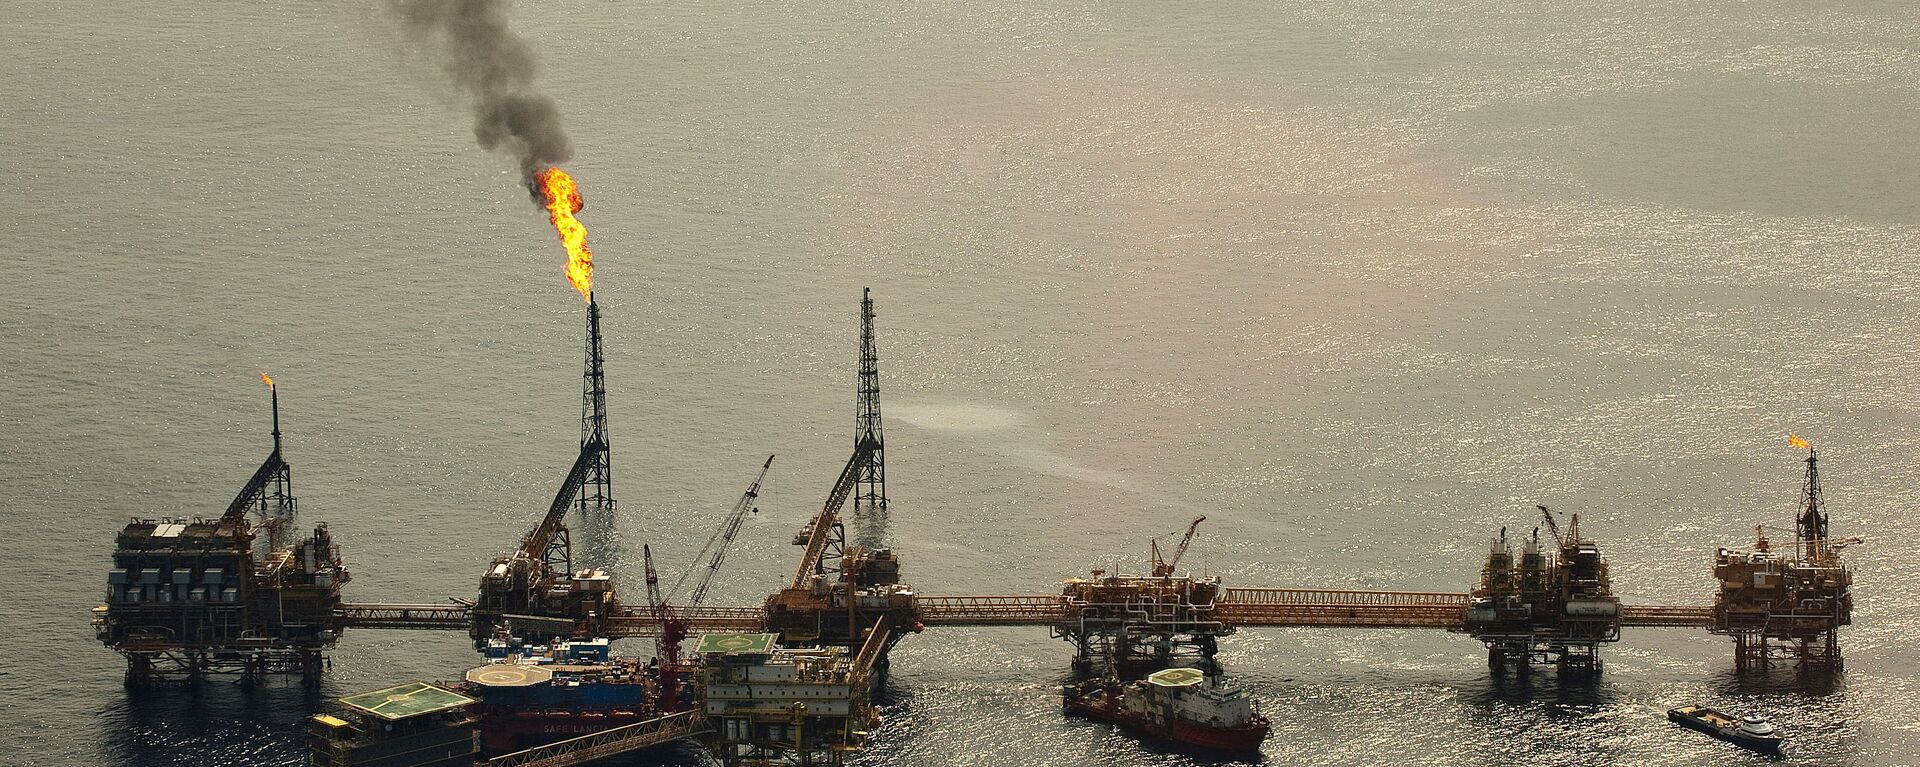 Aereal view of an oil complex called Cantarell of Pemex (Petroleos Mexicanos), in the Gulf of Mexico, off Ciudad del Carmen, Campeche State, Mexico, on August 5, 2010 - Sputnik Mundo, 1920, 23.02.2022